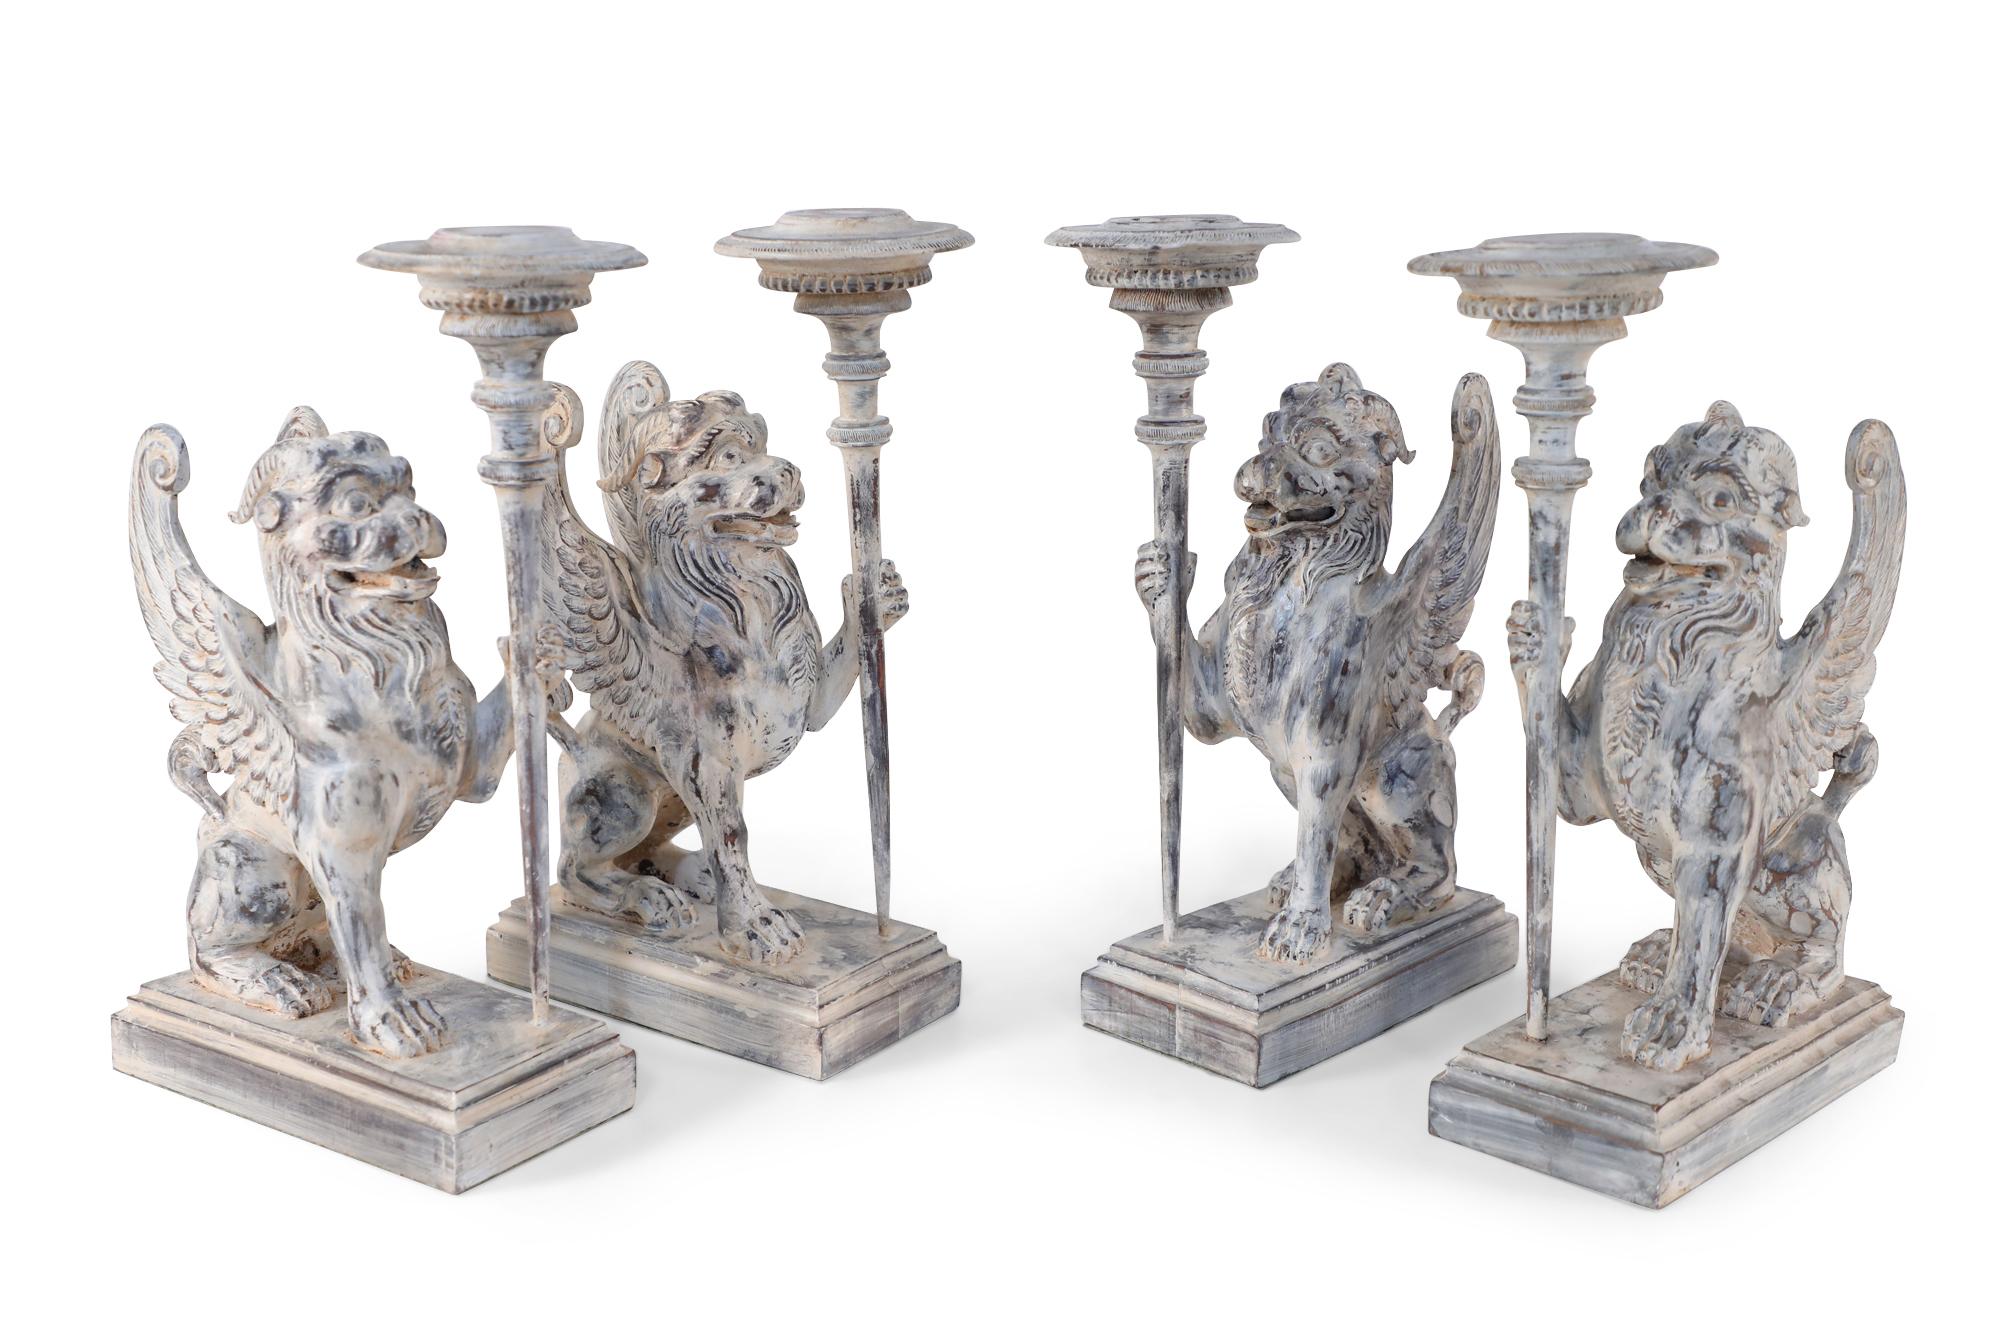 Pair of neoclassical style mythological carved wooden candle holders / bookends in the shape of chimeras holding a candle stick in one hand on stepped rectangular wooden bases with a white washed finish.